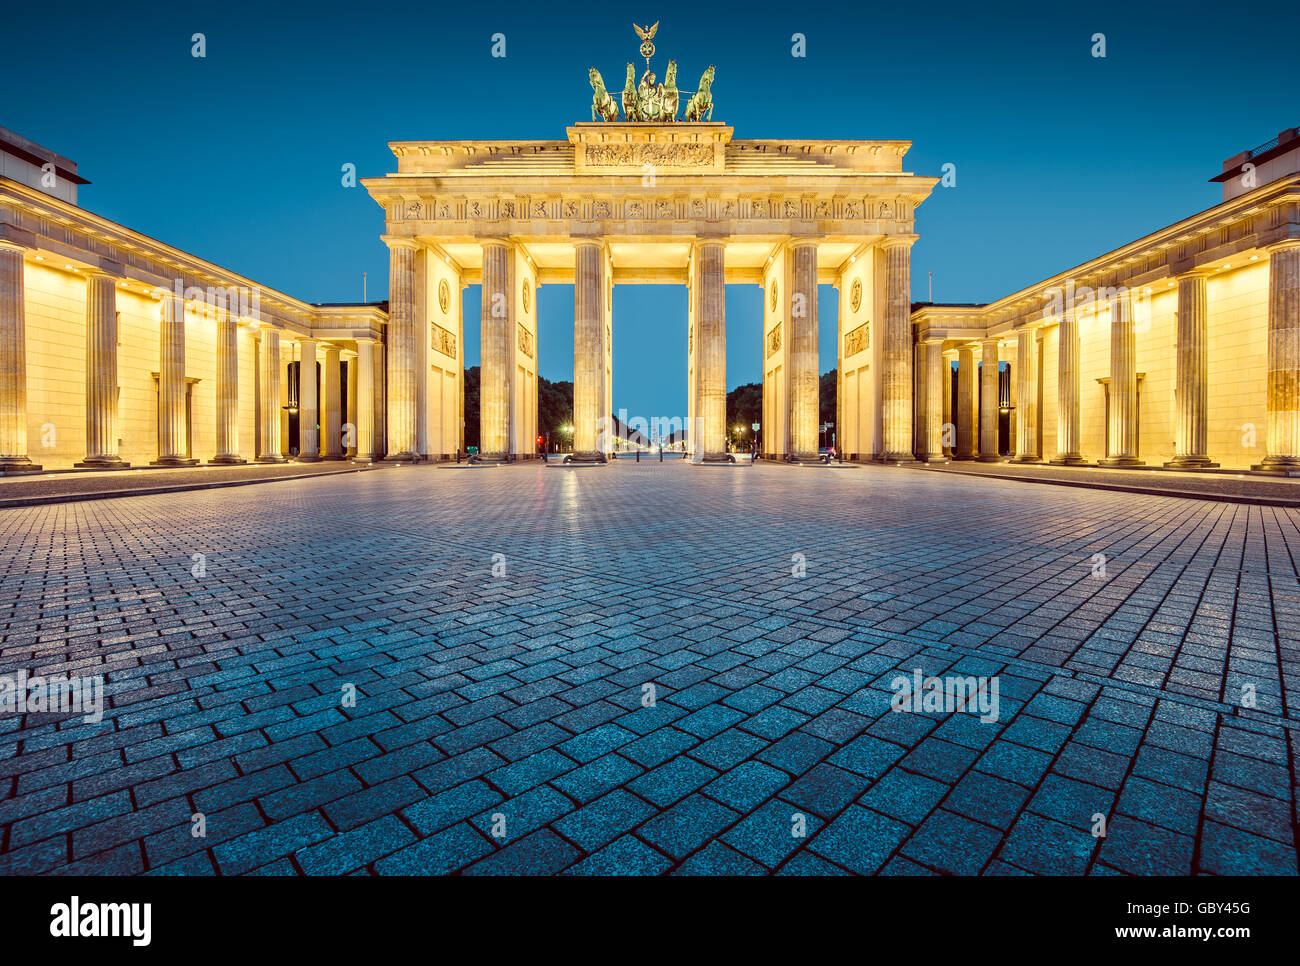 Classic view of famous Brandenburg Gate in twilight, central Berlin, Germany Stock Photo